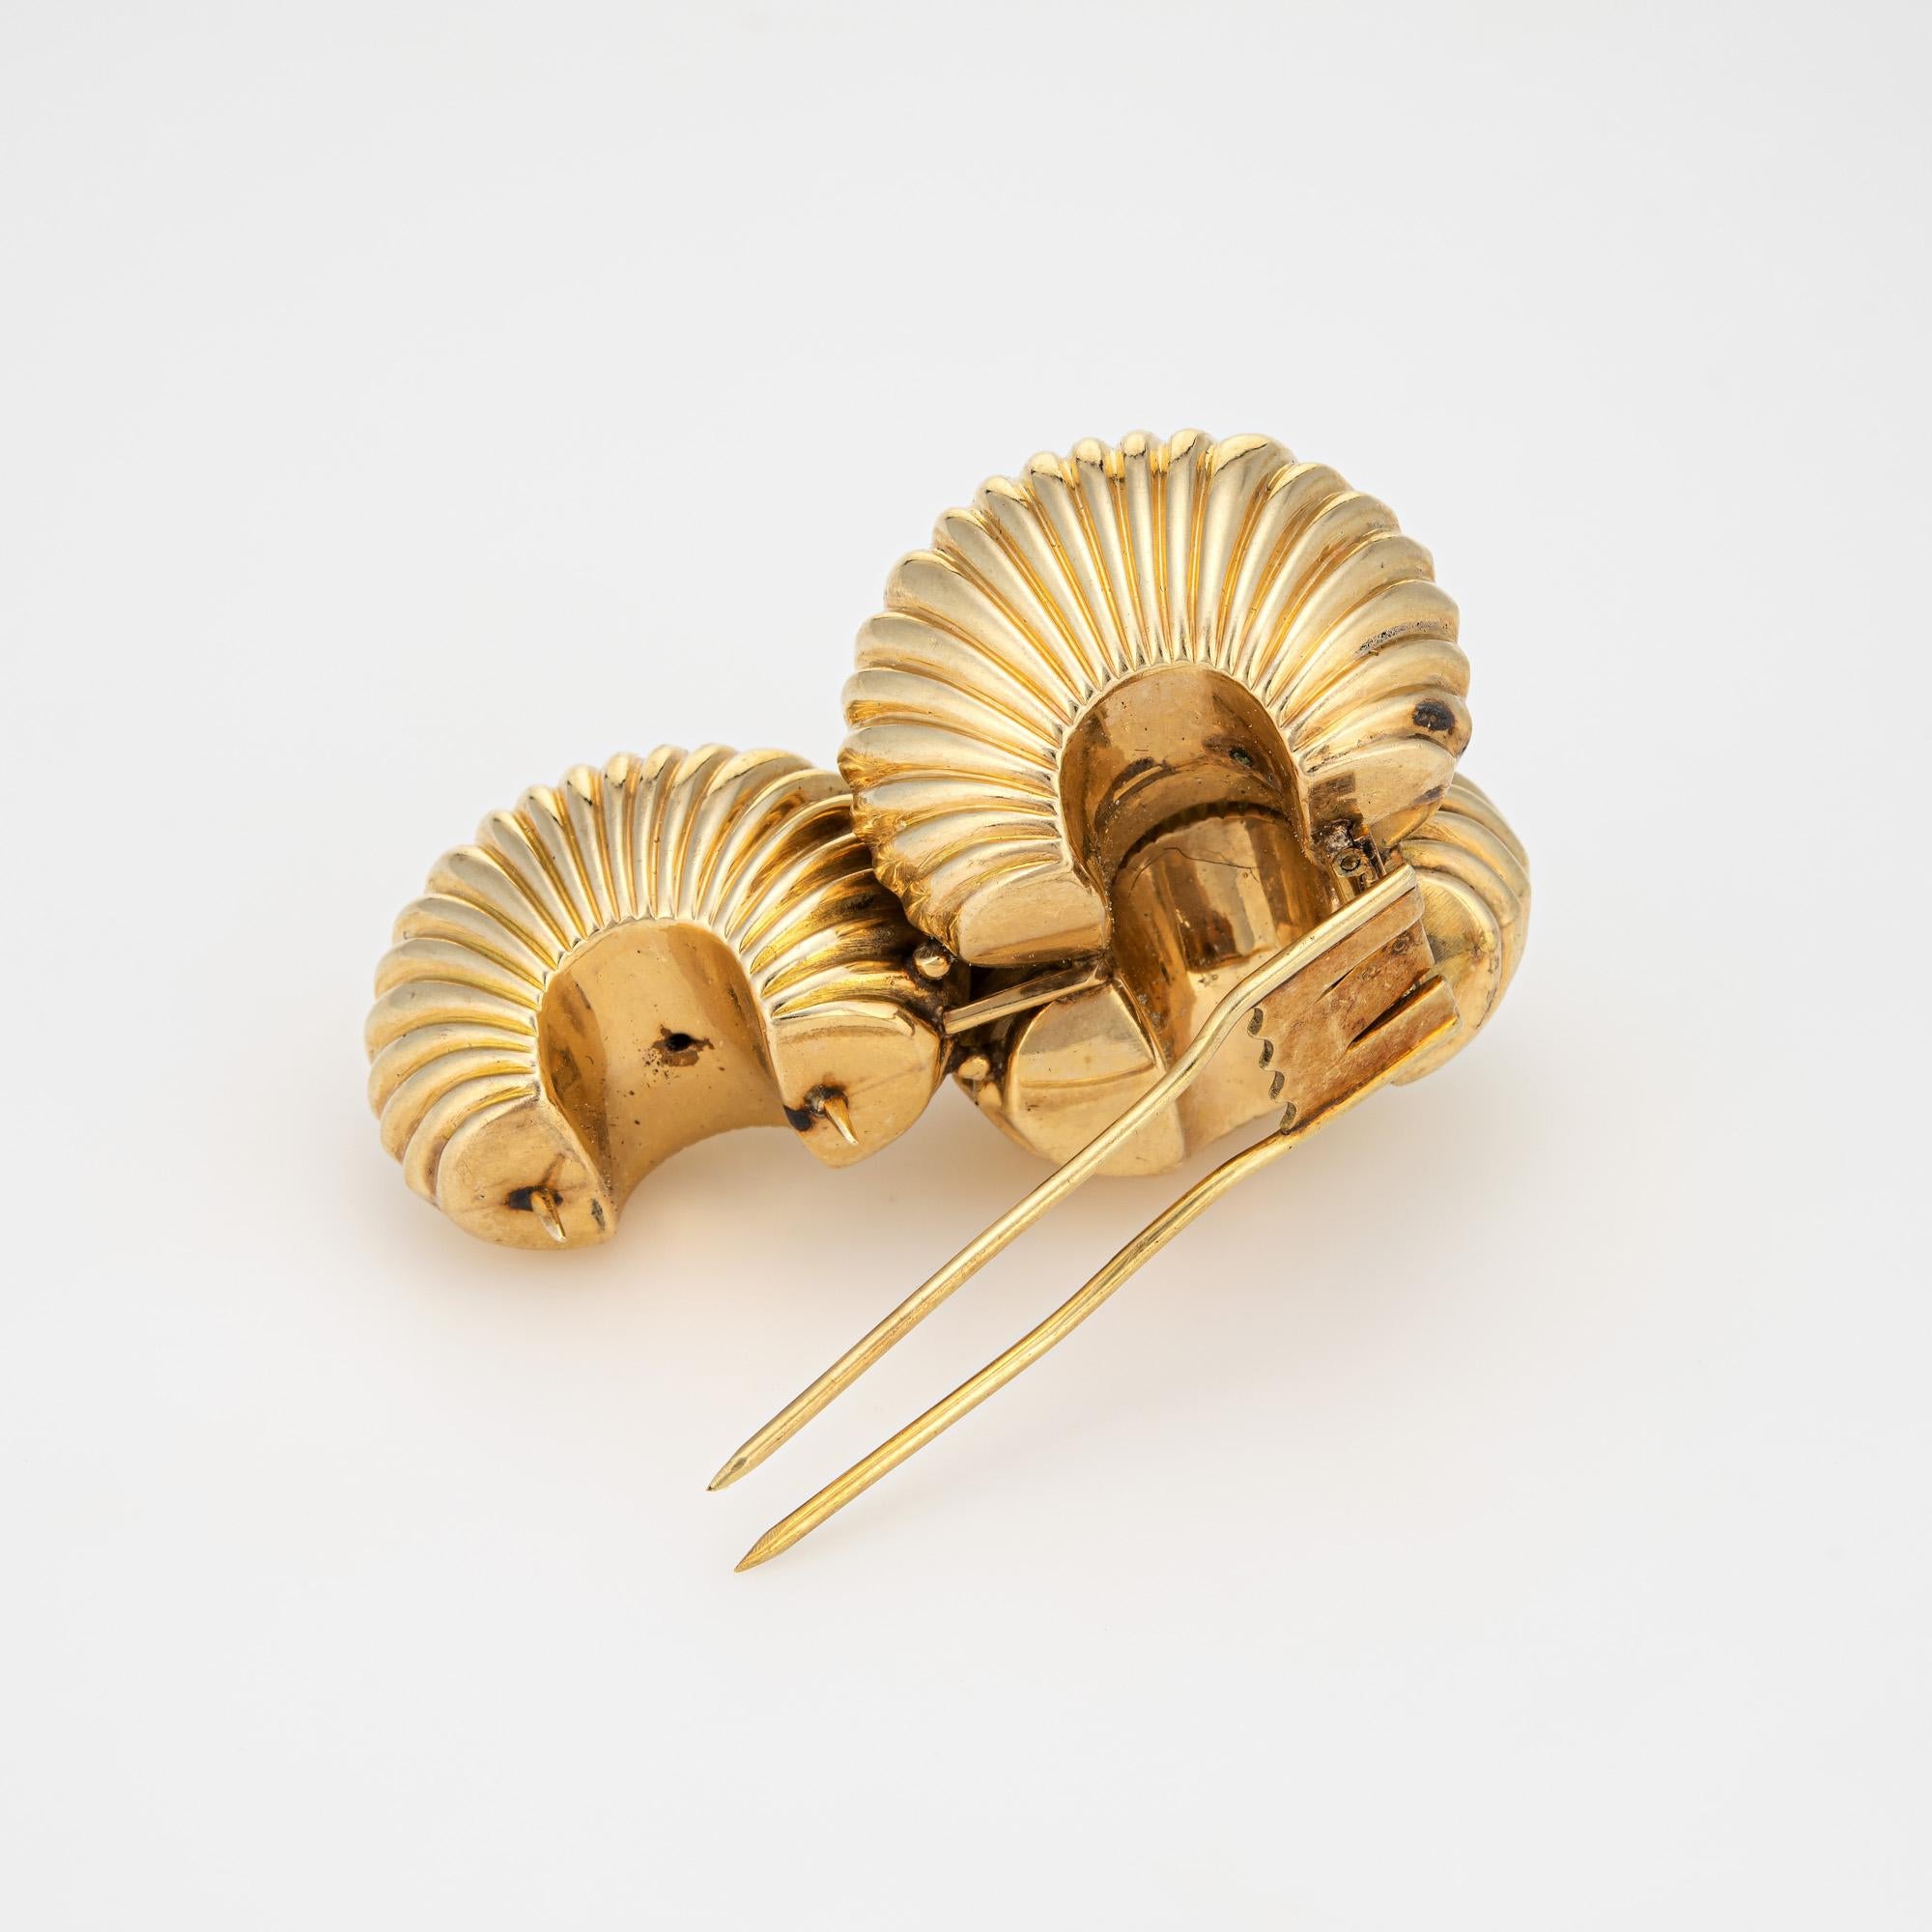 Finely detailed vintage Cartier brooch (circa 1945) crafted in 14 karat yellow gold. 

The stylish vintage brooch features 3 fluted high domes in a textured shell motif. The whimsical design of the brooch highlights the bold aesthetic of the retro